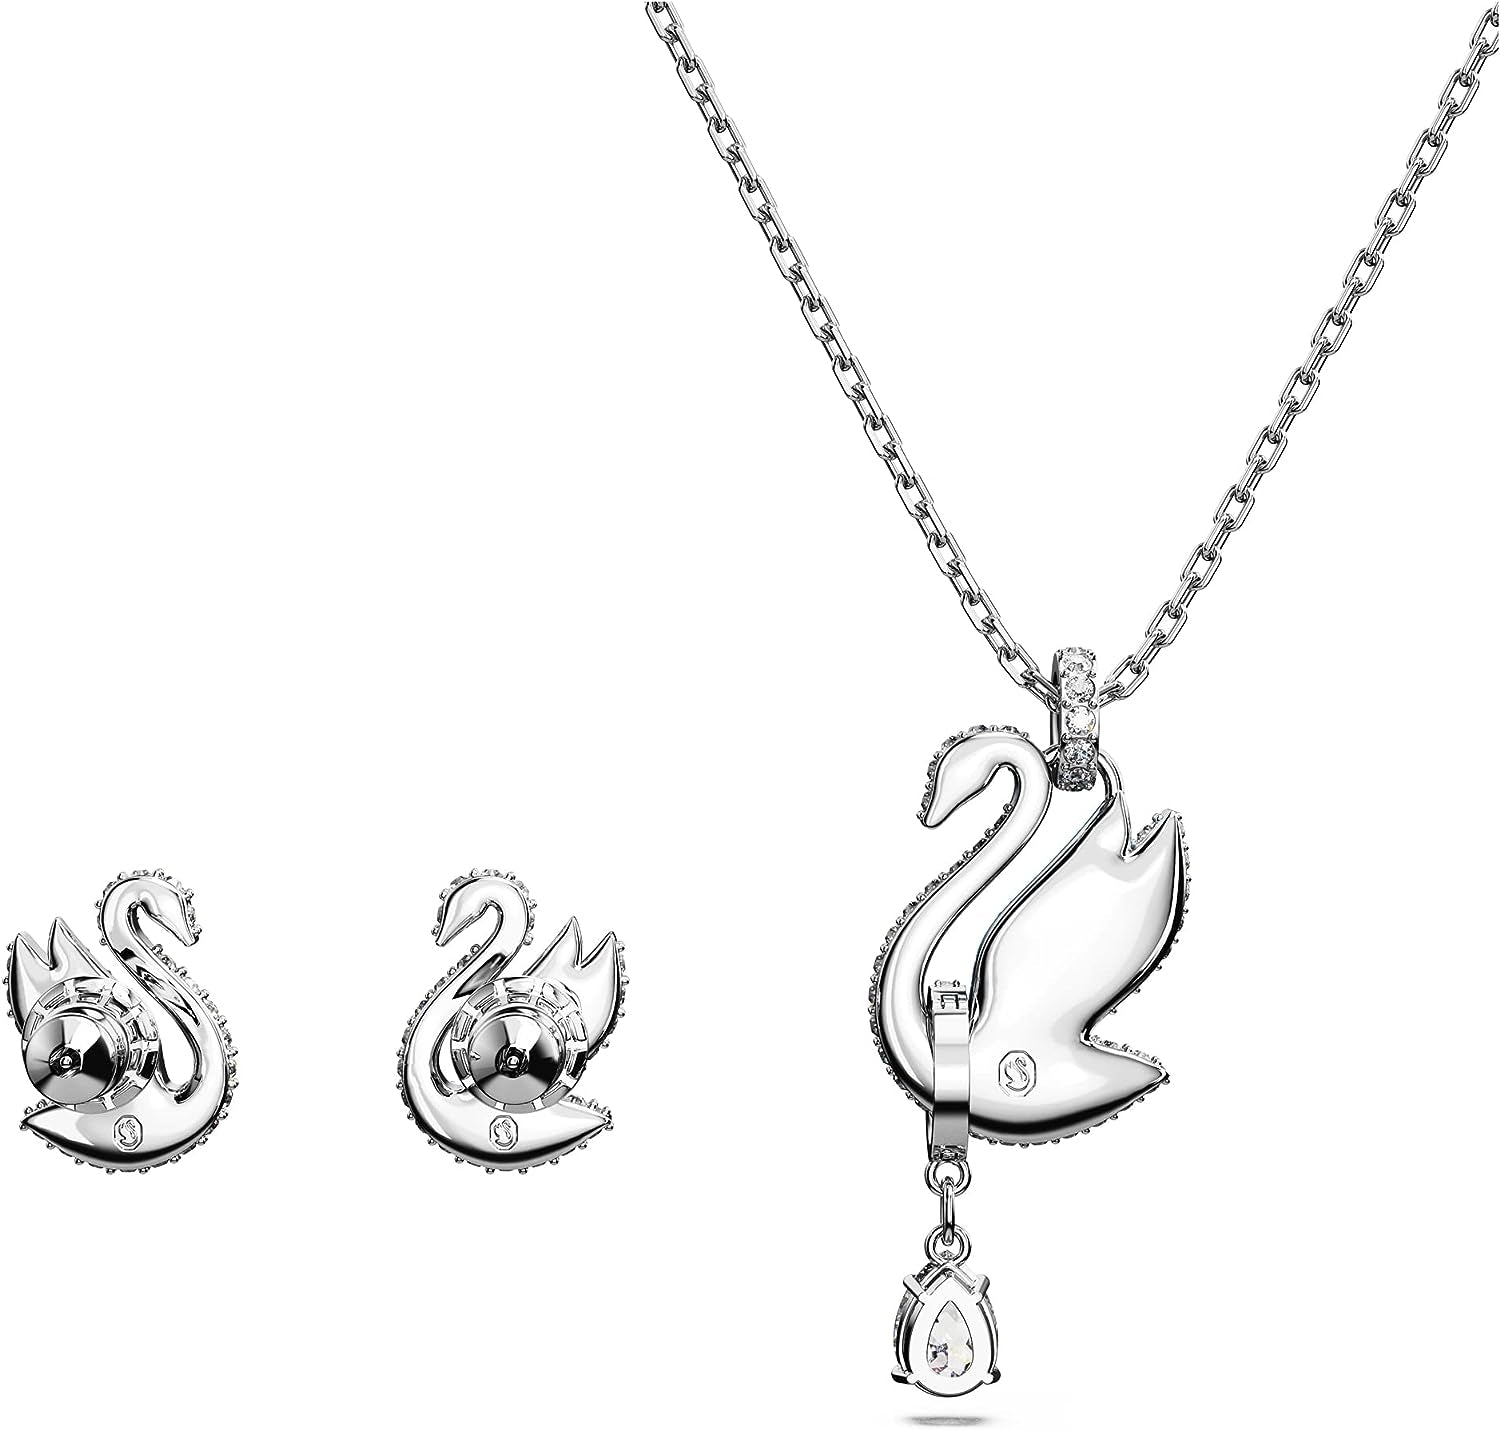 Iconic Swan Jewelry Set - Necklace and Earrings with Blue Swan Motif Rhodium Finish